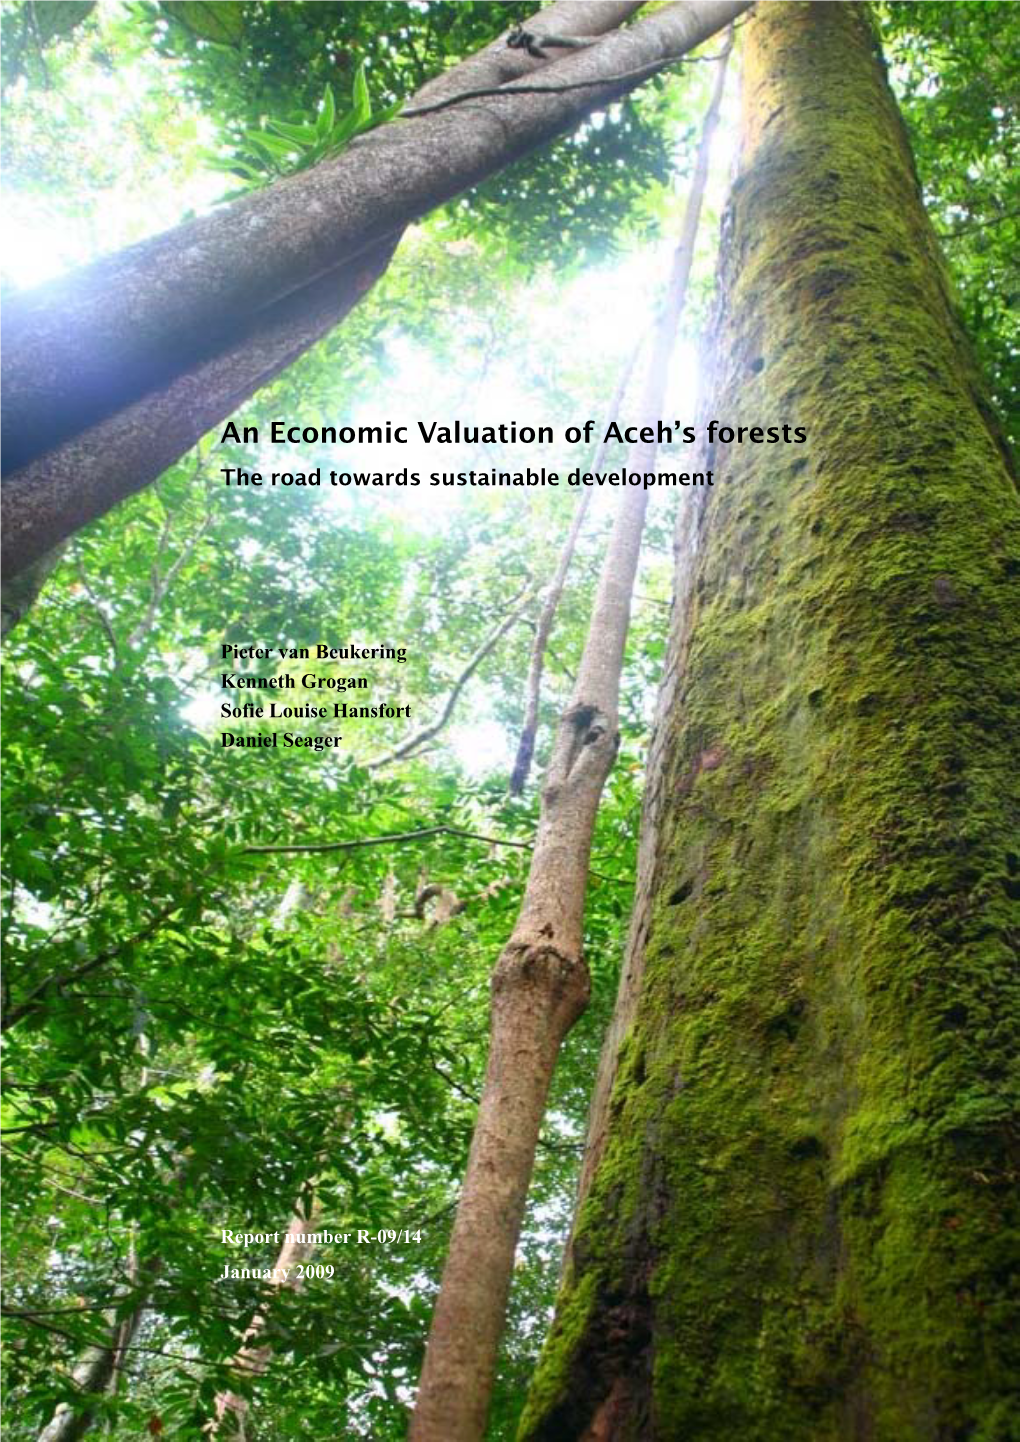 An Economic Valuation of Aceh's Forests